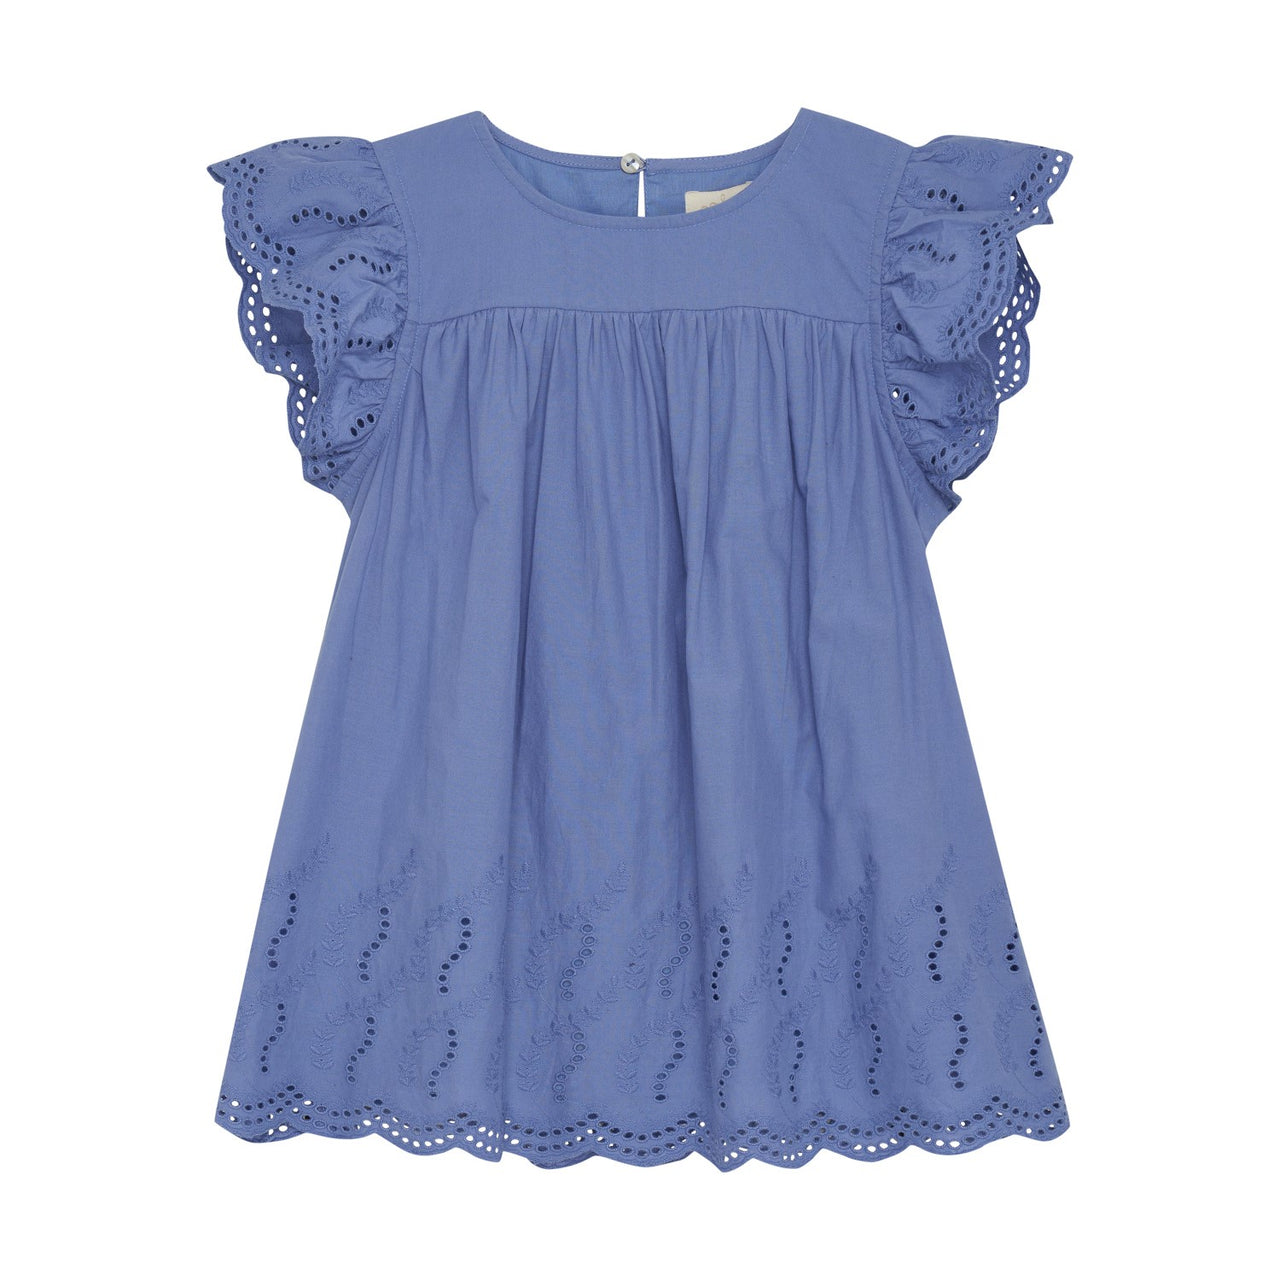 Creamie Embroidered Top Colony Blue 822618 5103